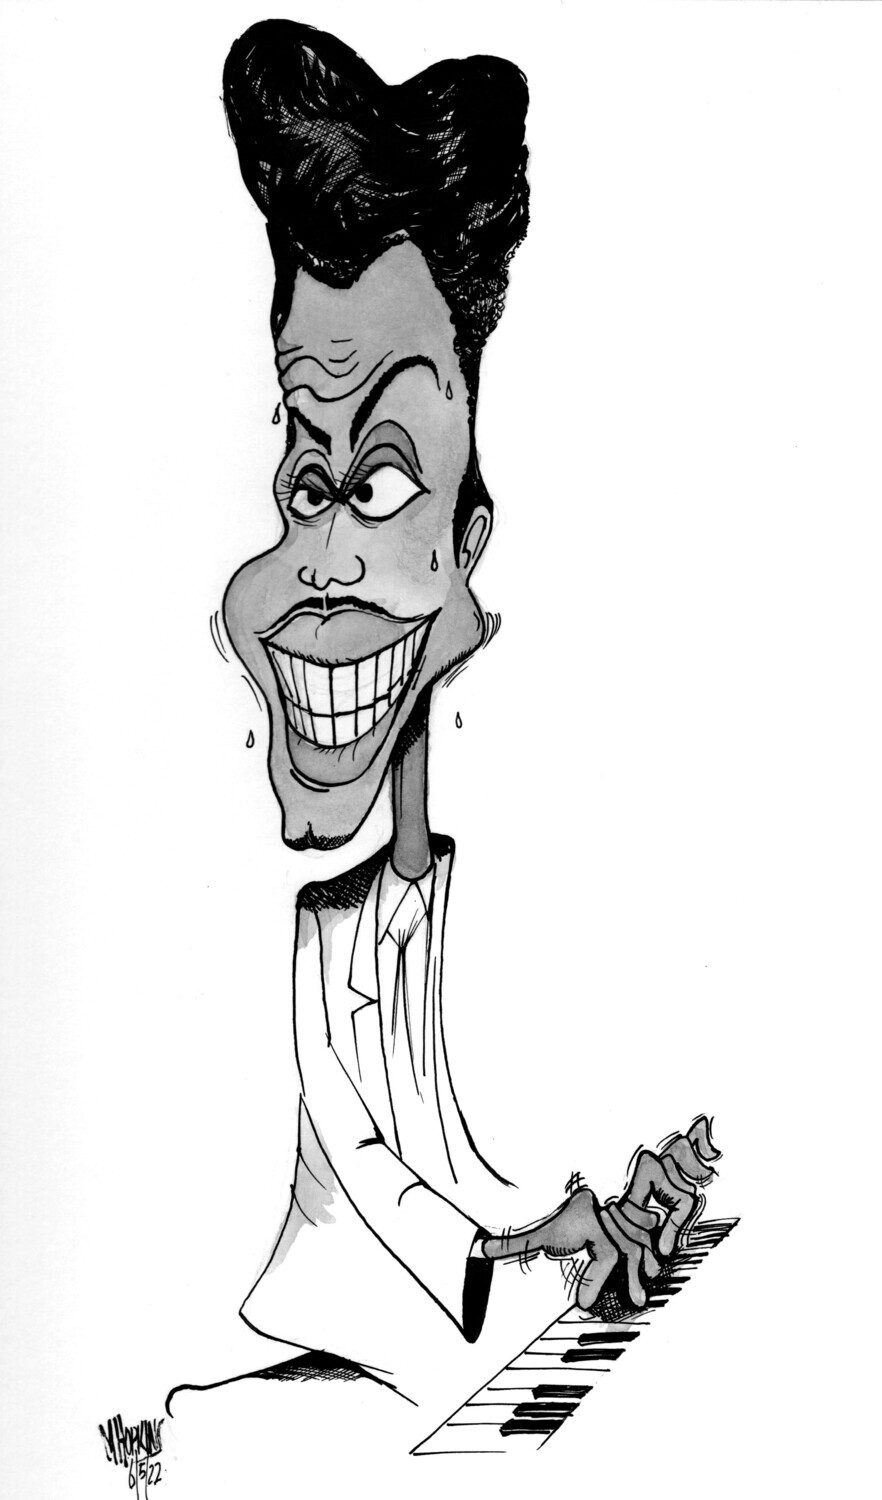 Little Richard - Caricature Limited Edition Giclée Prints from $50 to $100